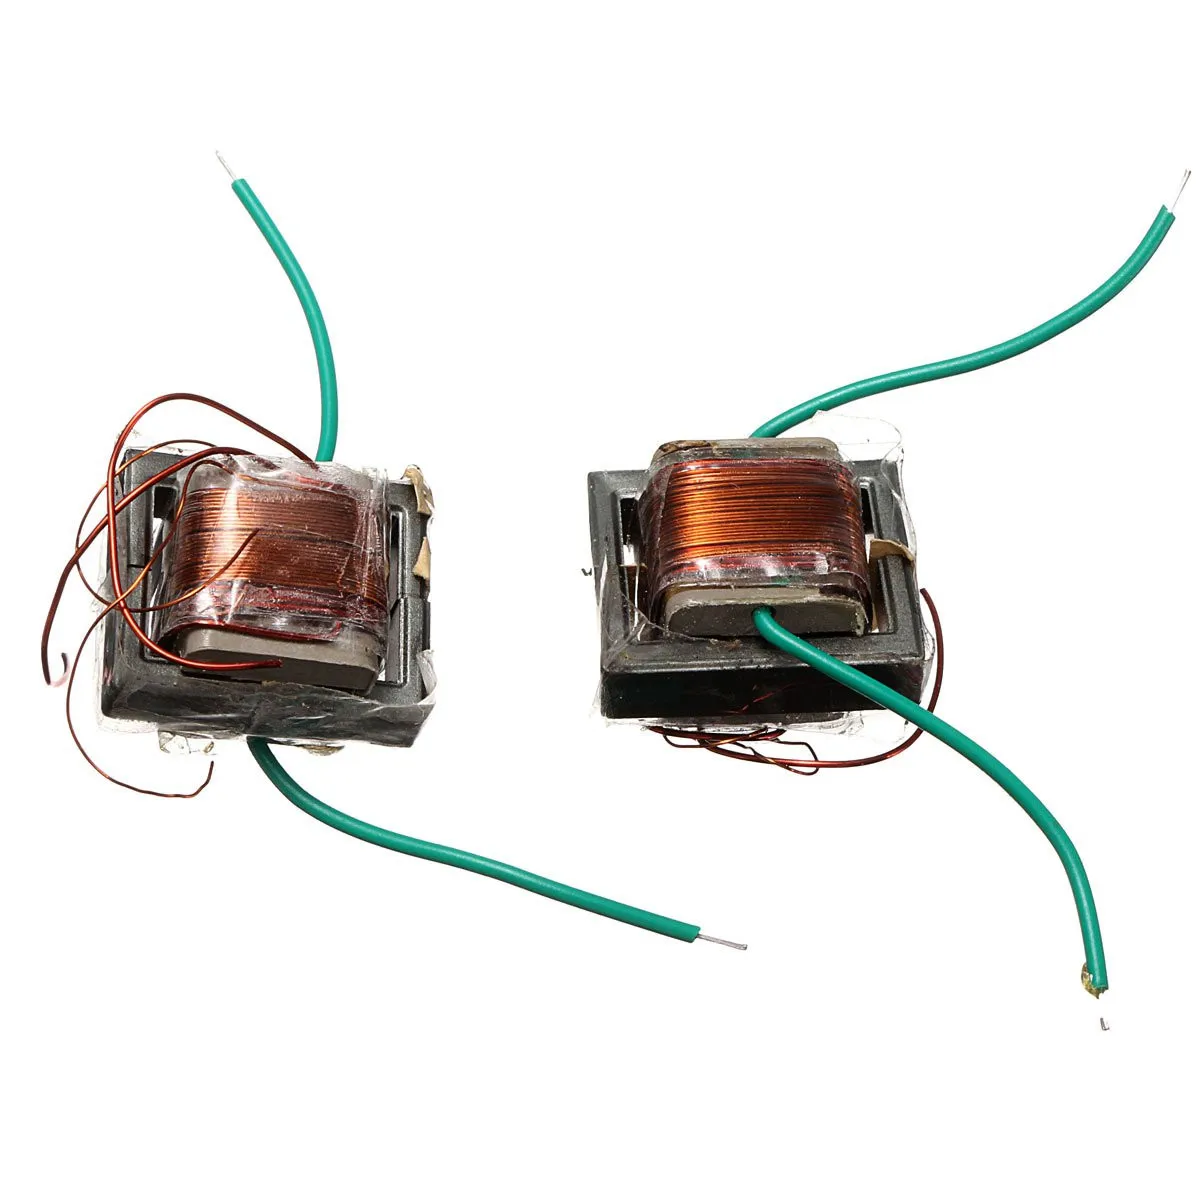 2PCS 10KV High Frequency High Voltage Transformer Booster Coil Inverter new fh 